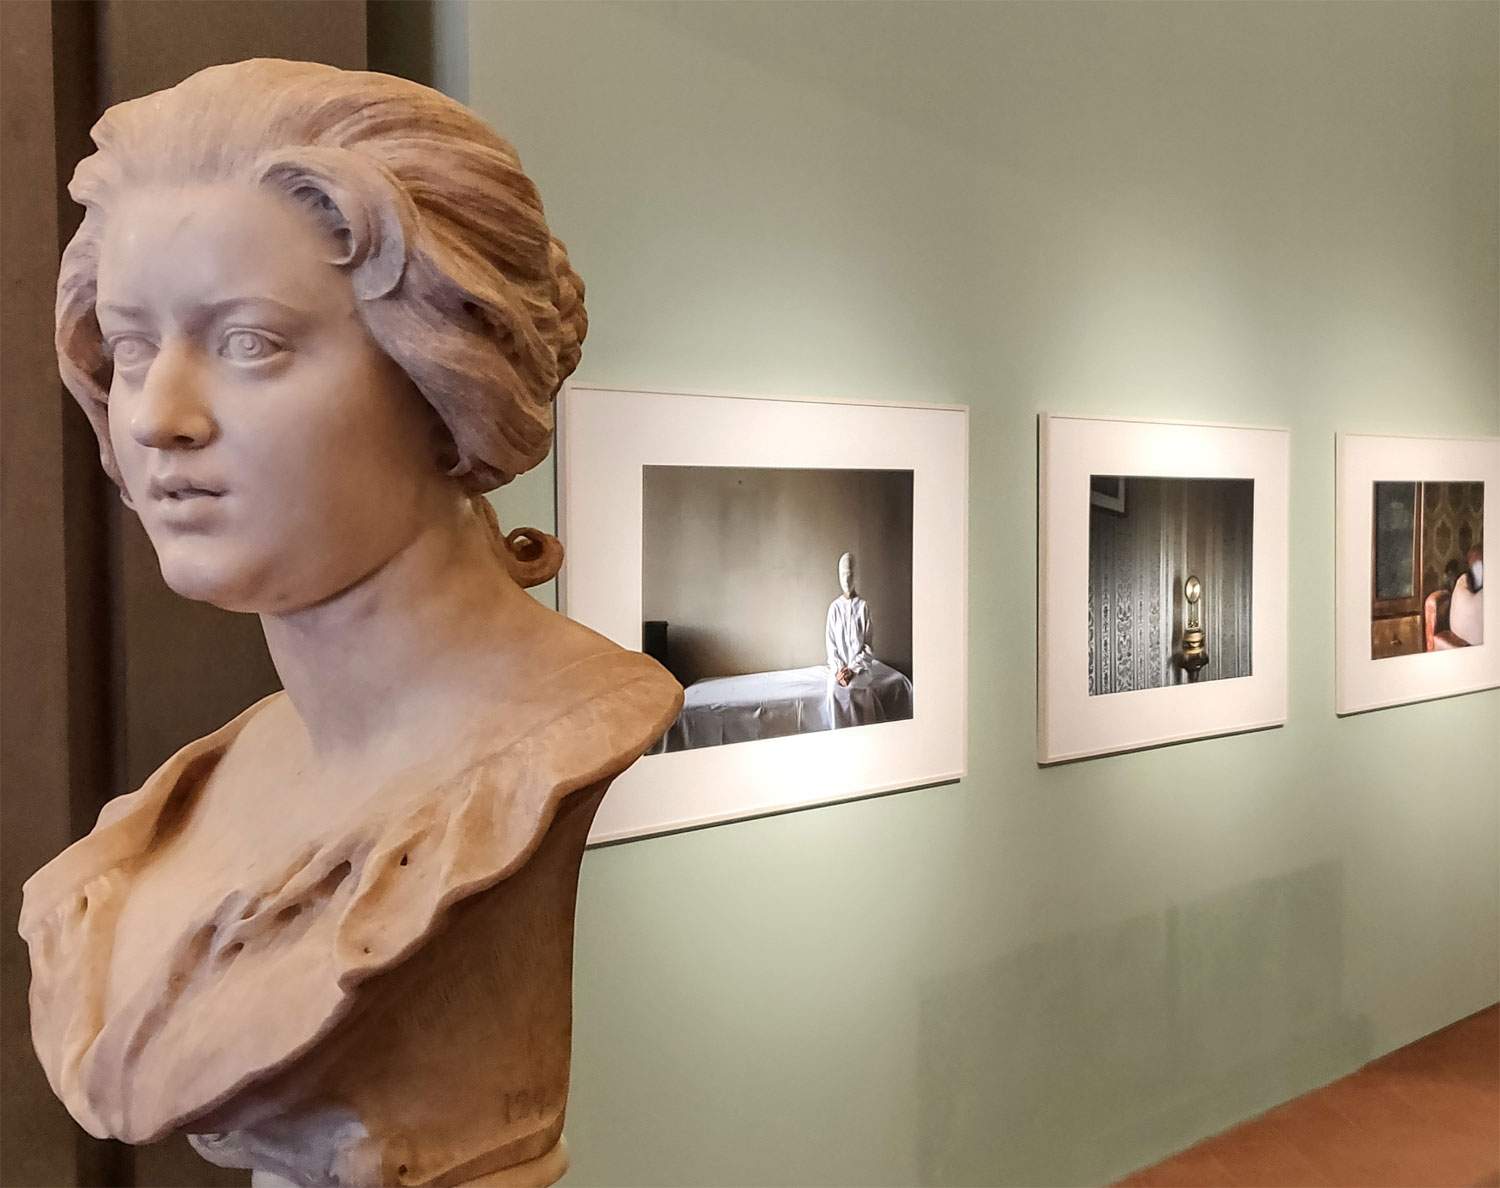 An exhibition against violence against women at the Uffizi. Protagonists Bernini and Ilaria Sagaria